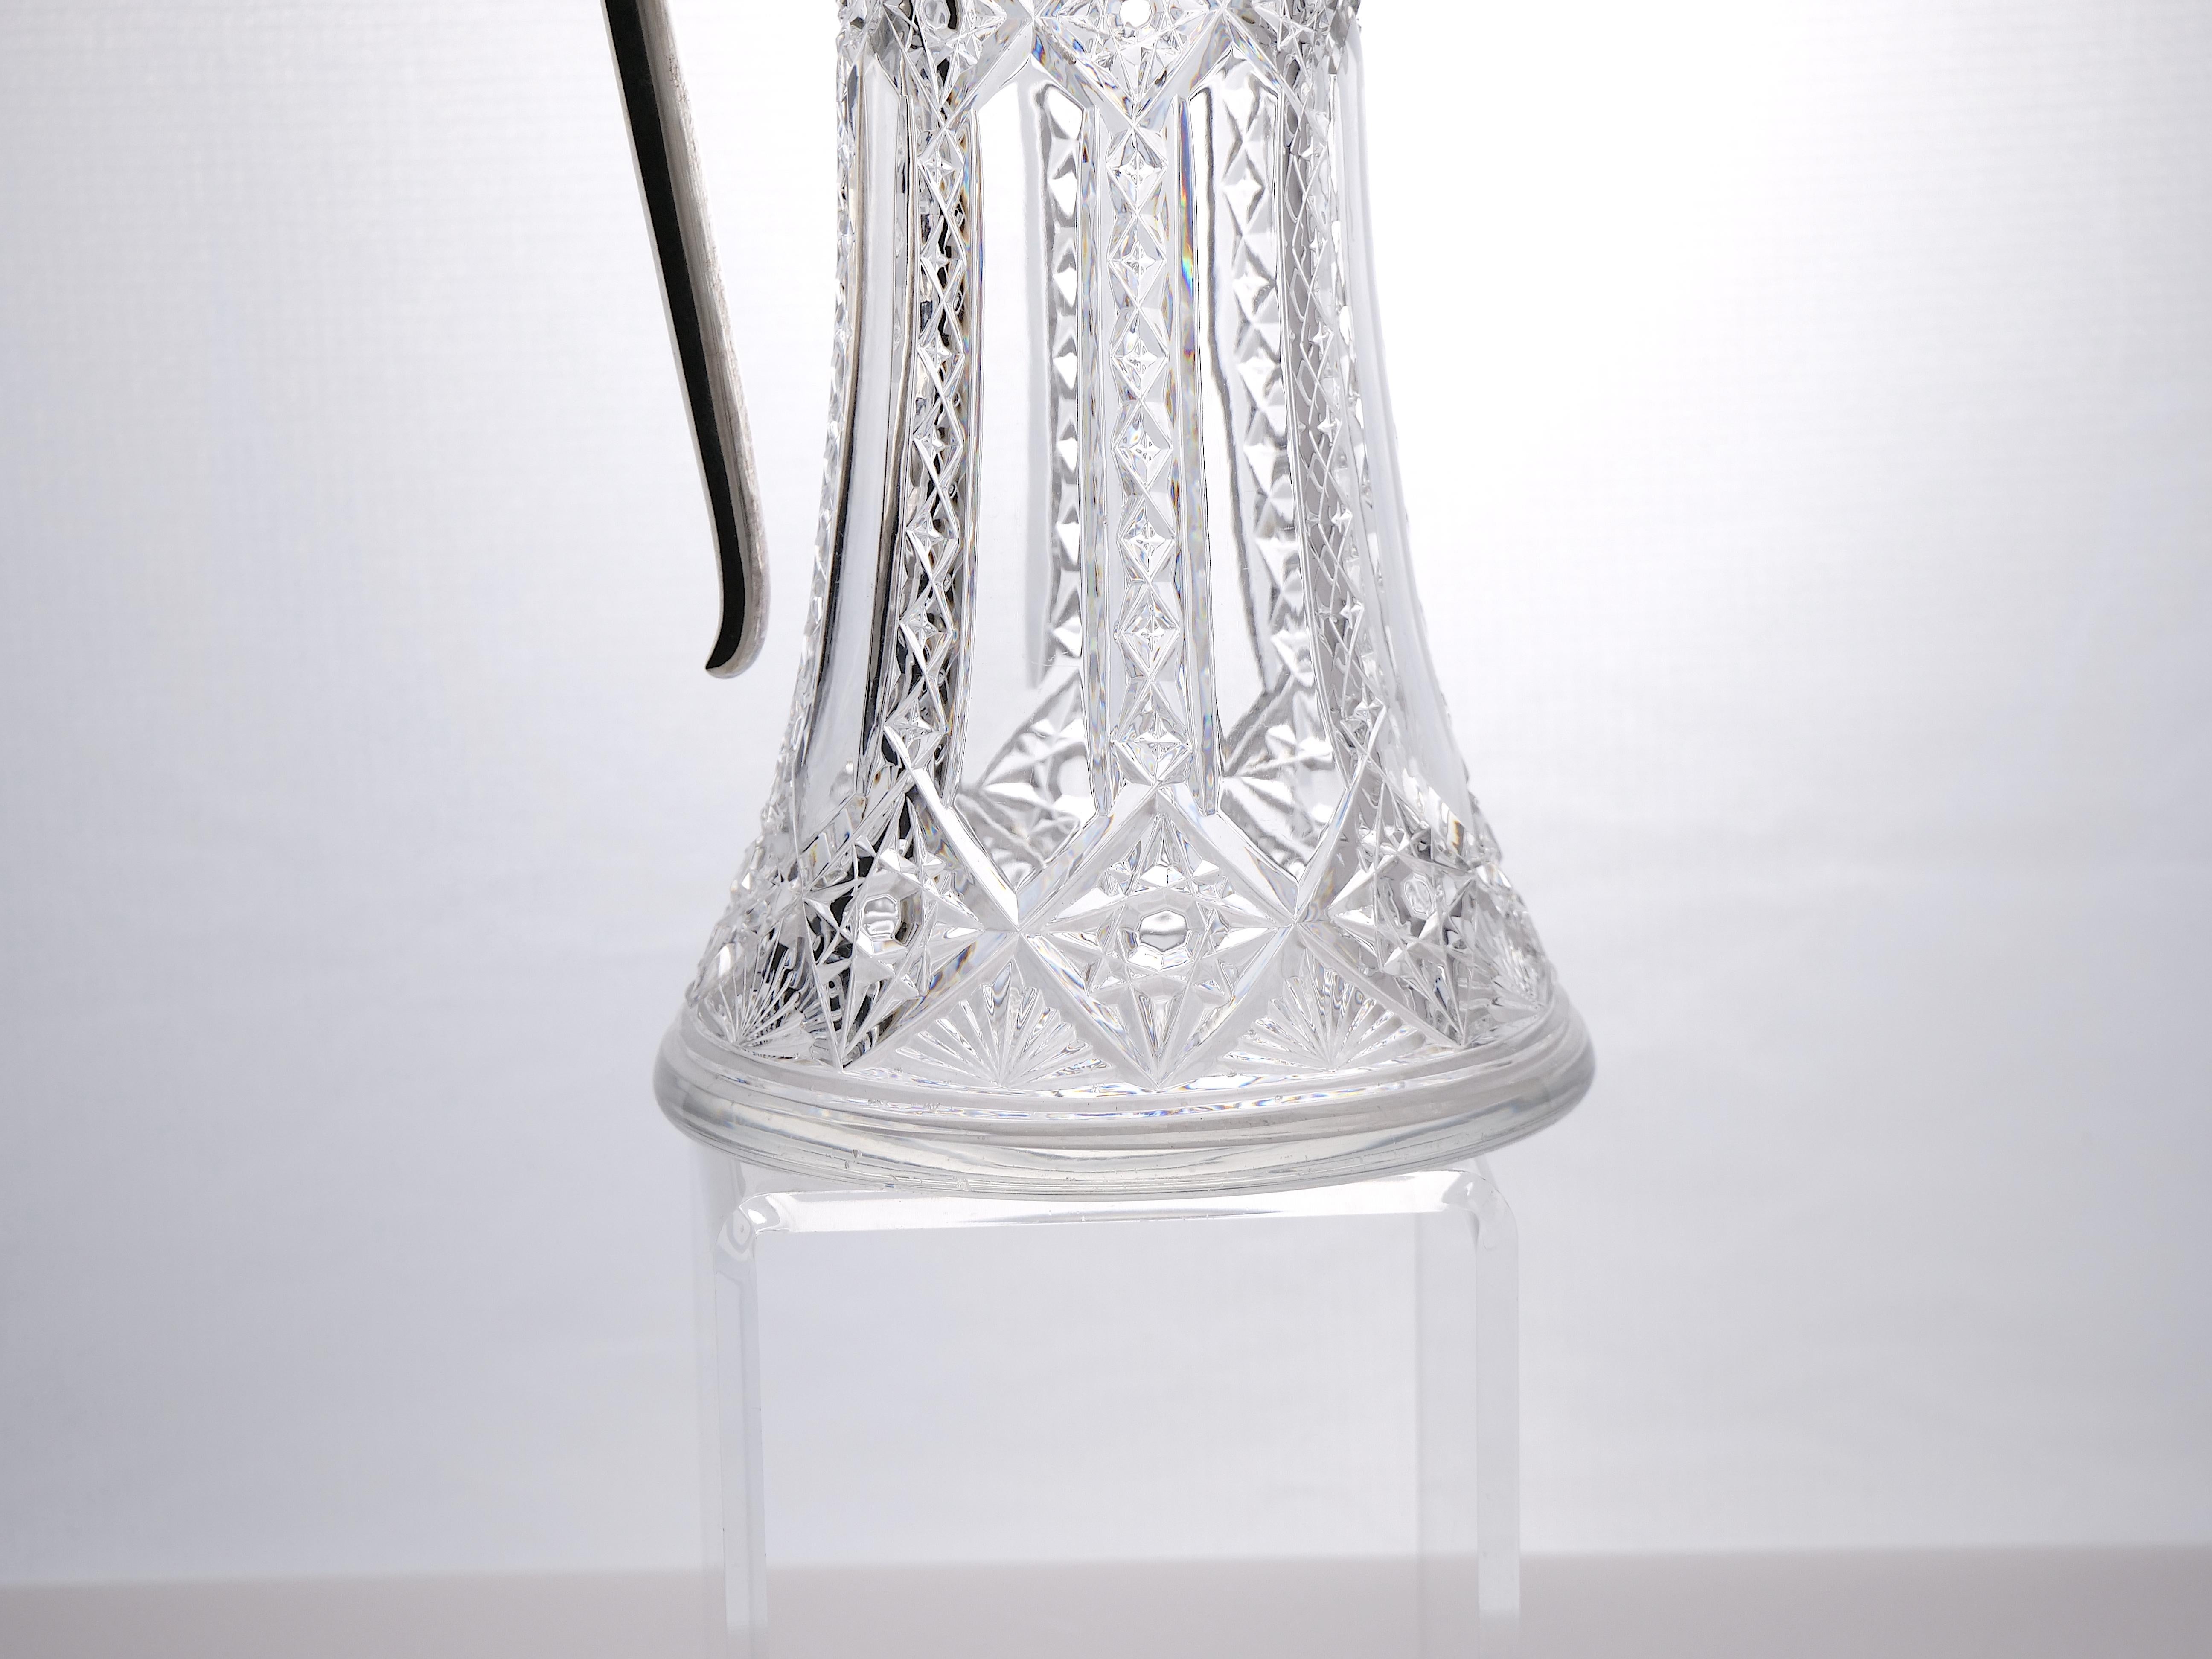 Late 19th Century 19th Century Sterling Silver / Cut Glass Claret Jug / Pitcher For Sale